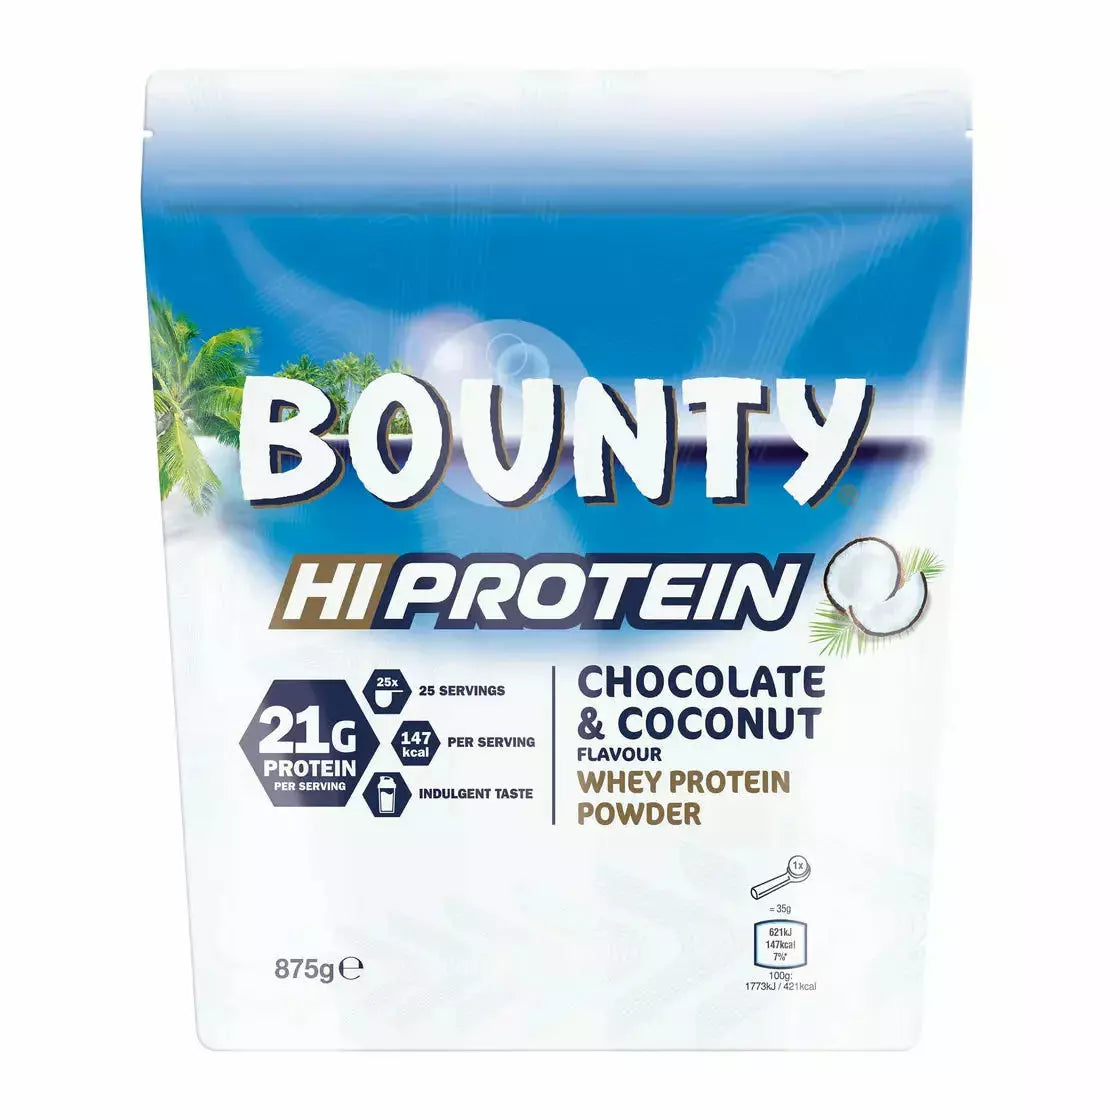 MARS Brand Hi Protein Whey Protein Powder (25 servings) Whey Protein Bounty BEST BY OCT 14. 2022 HiProtein